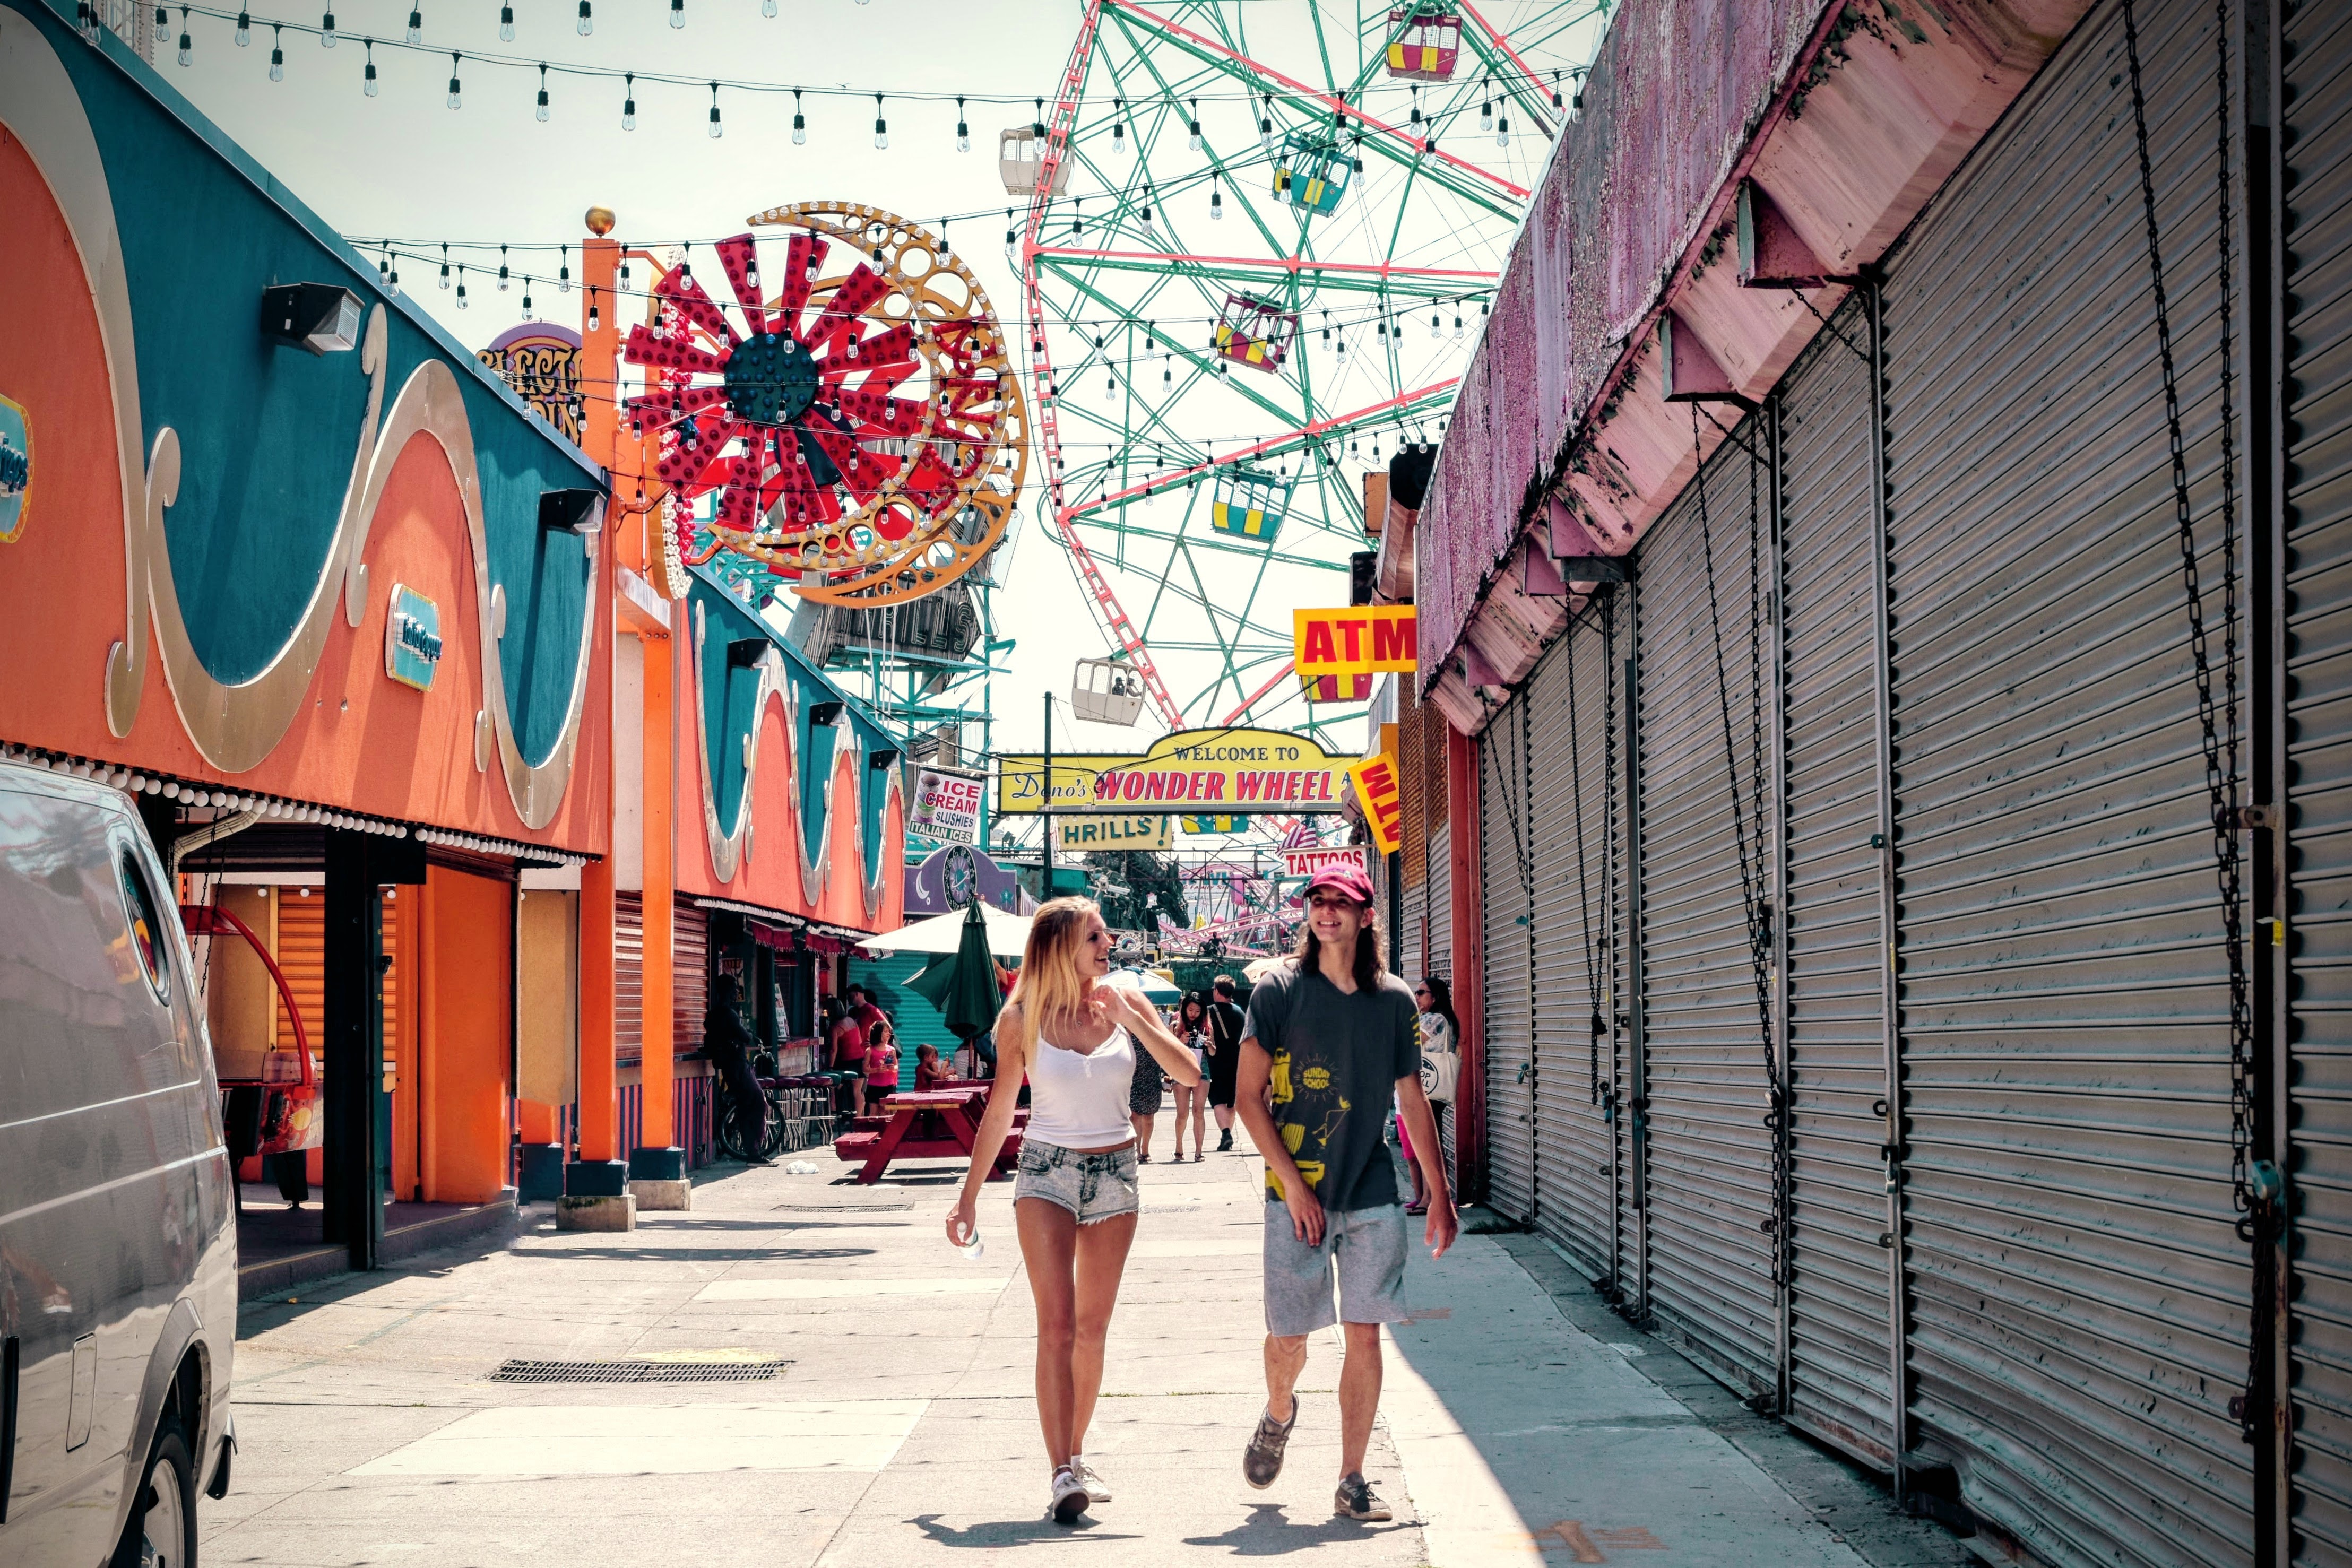 2 women walking in the carnival during daytime photo